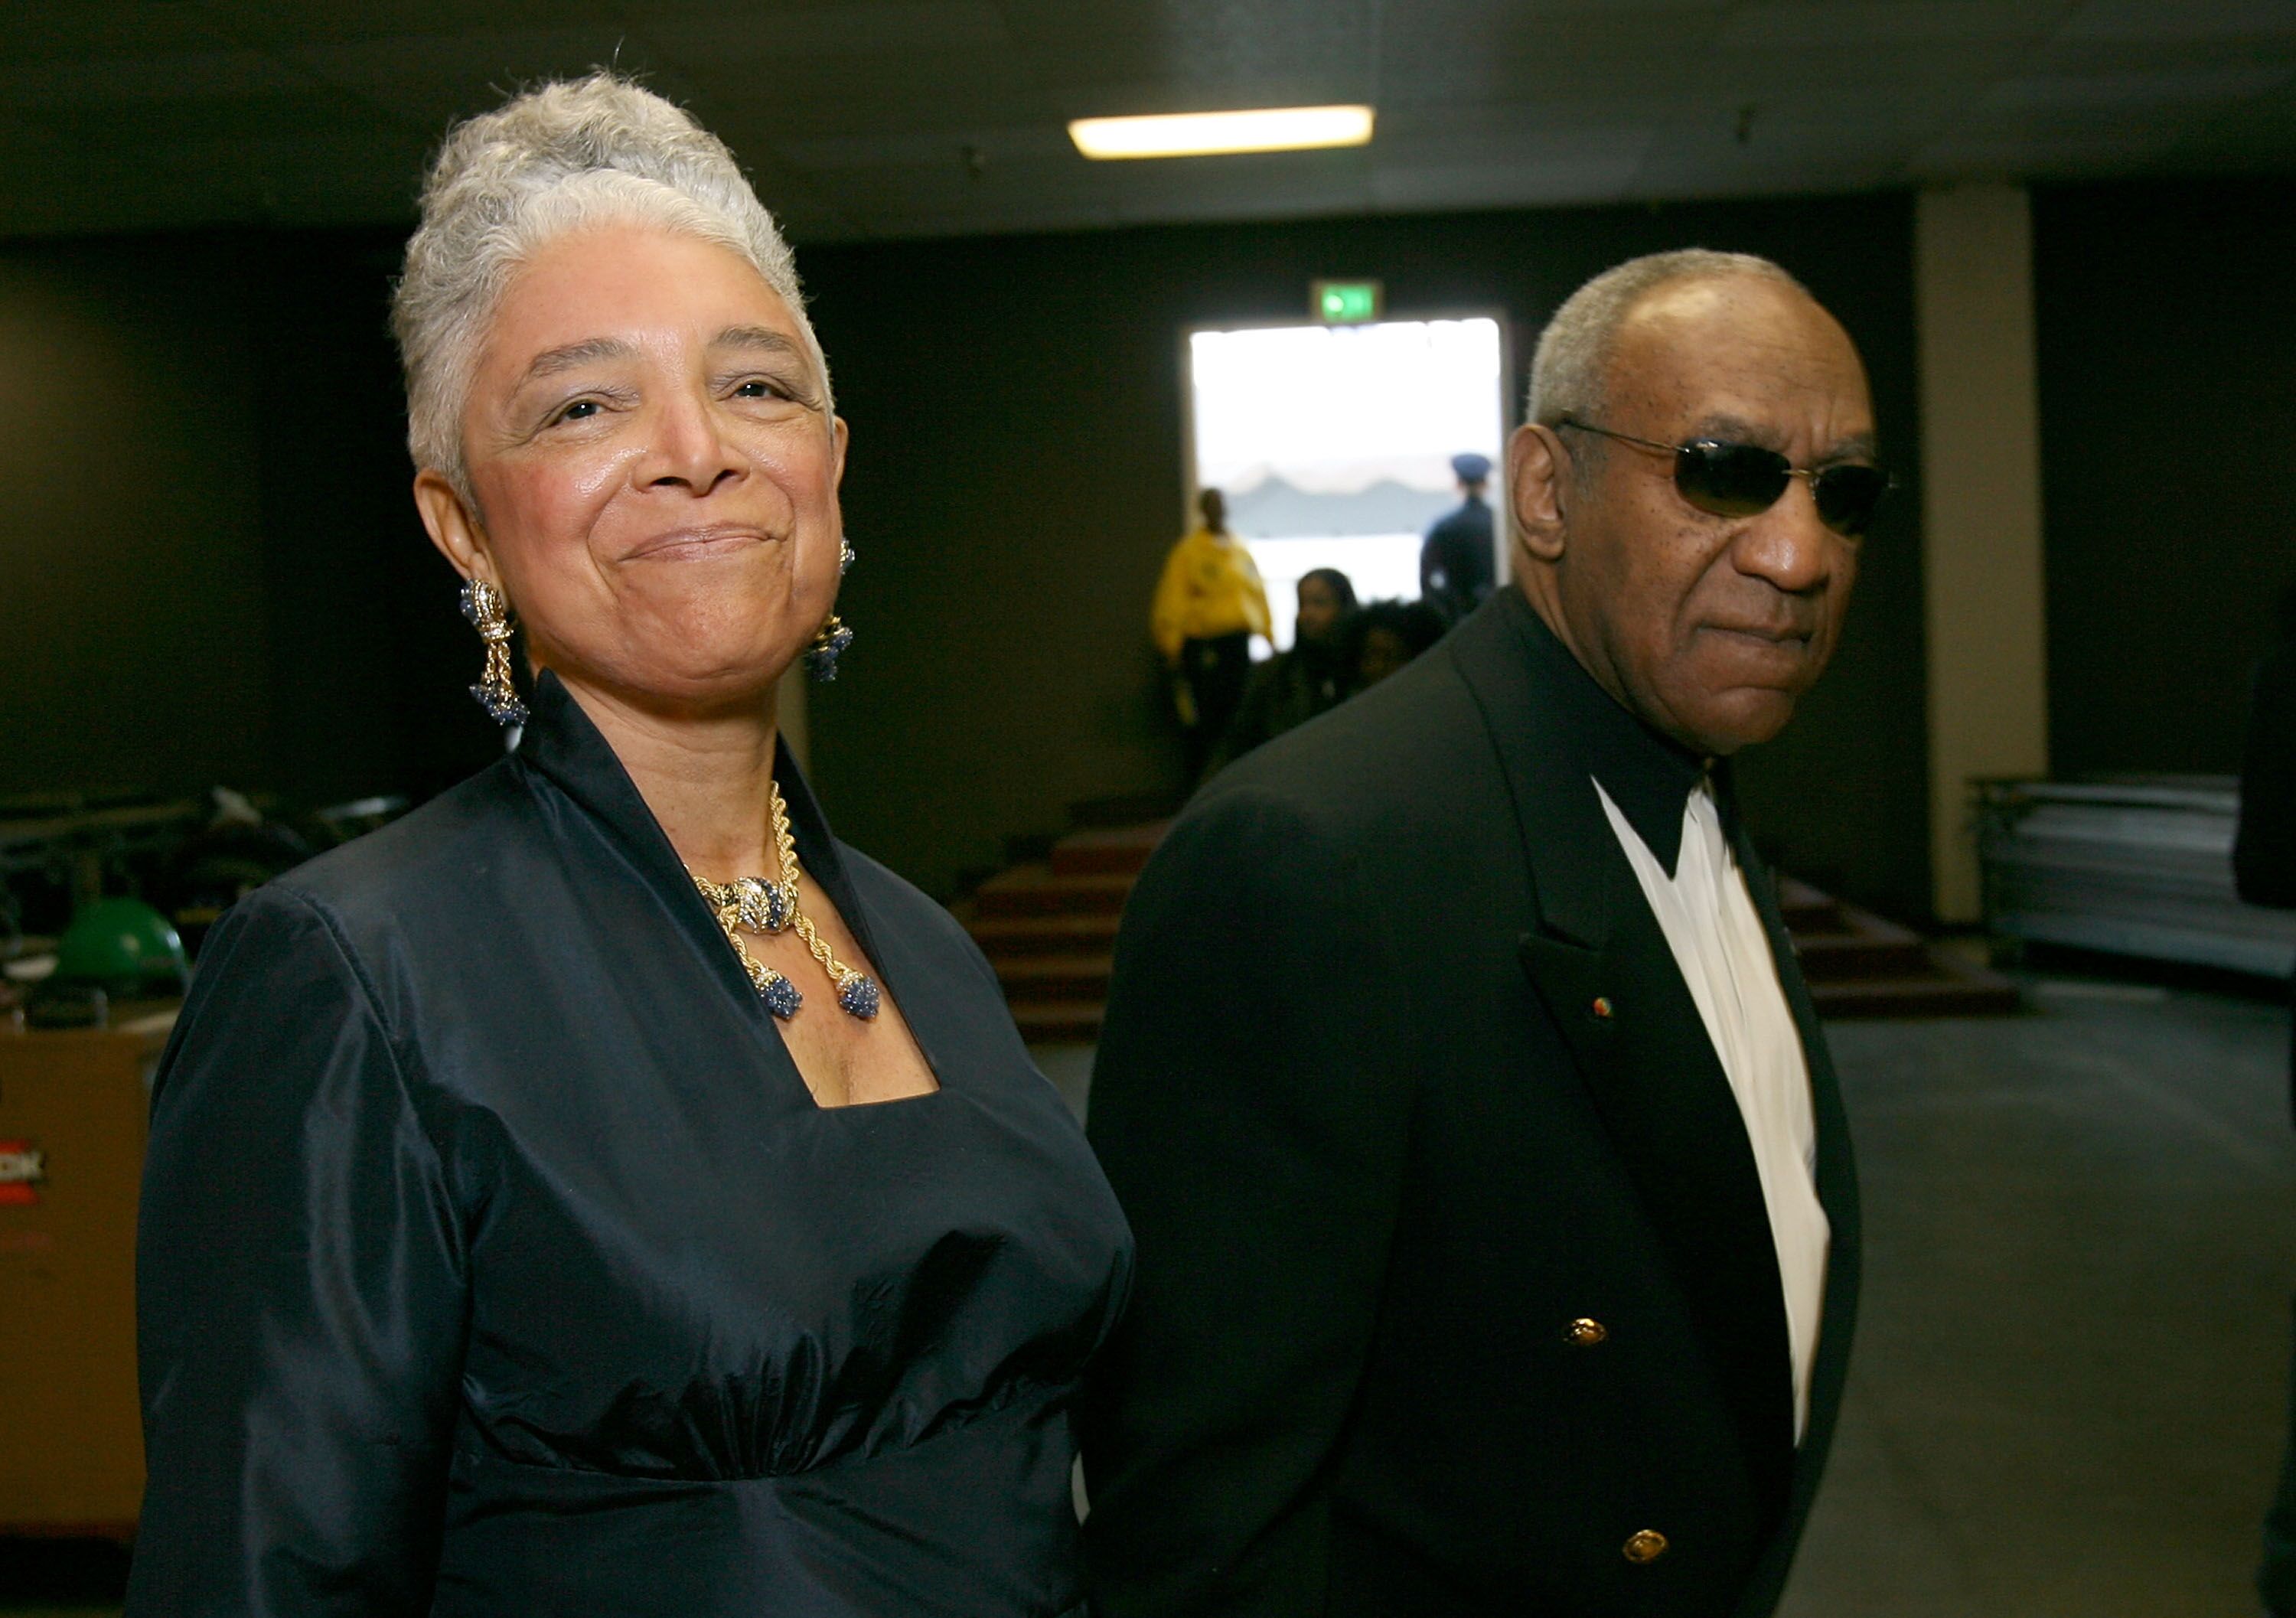 Bill and Camilly Cosby smiling for the camera | Source: Getty Images